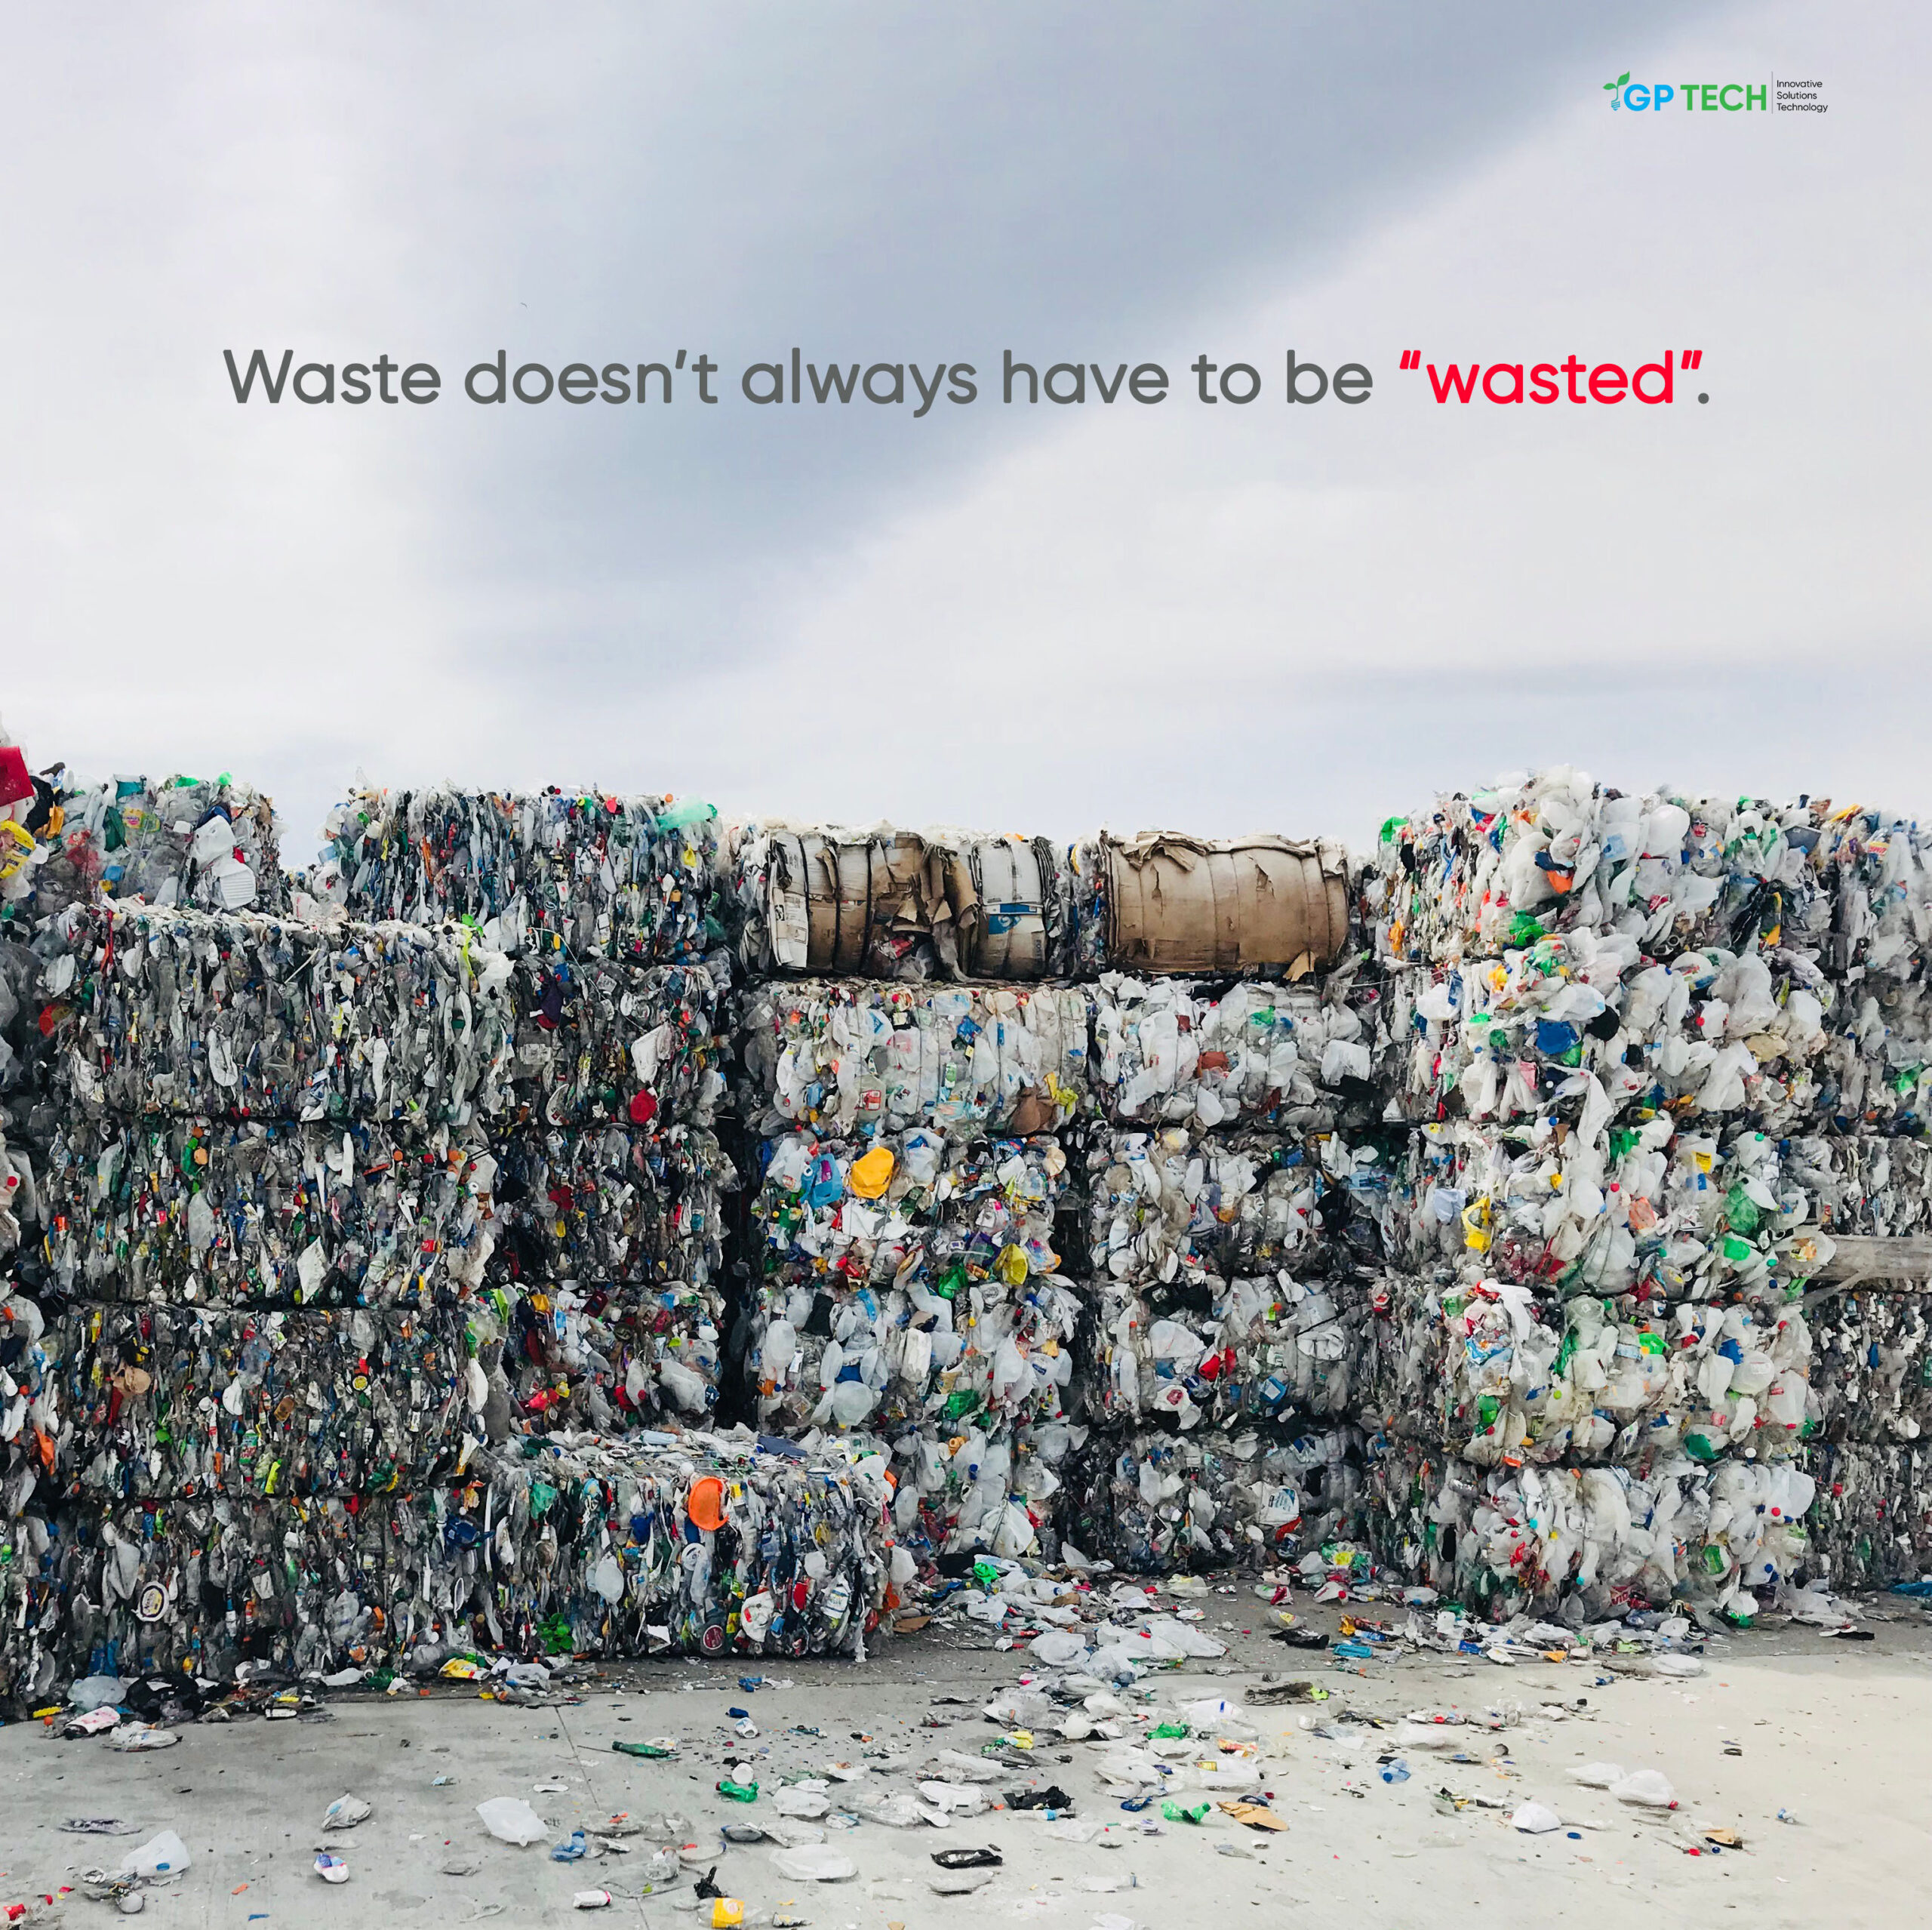 A small change in our perspective on waste